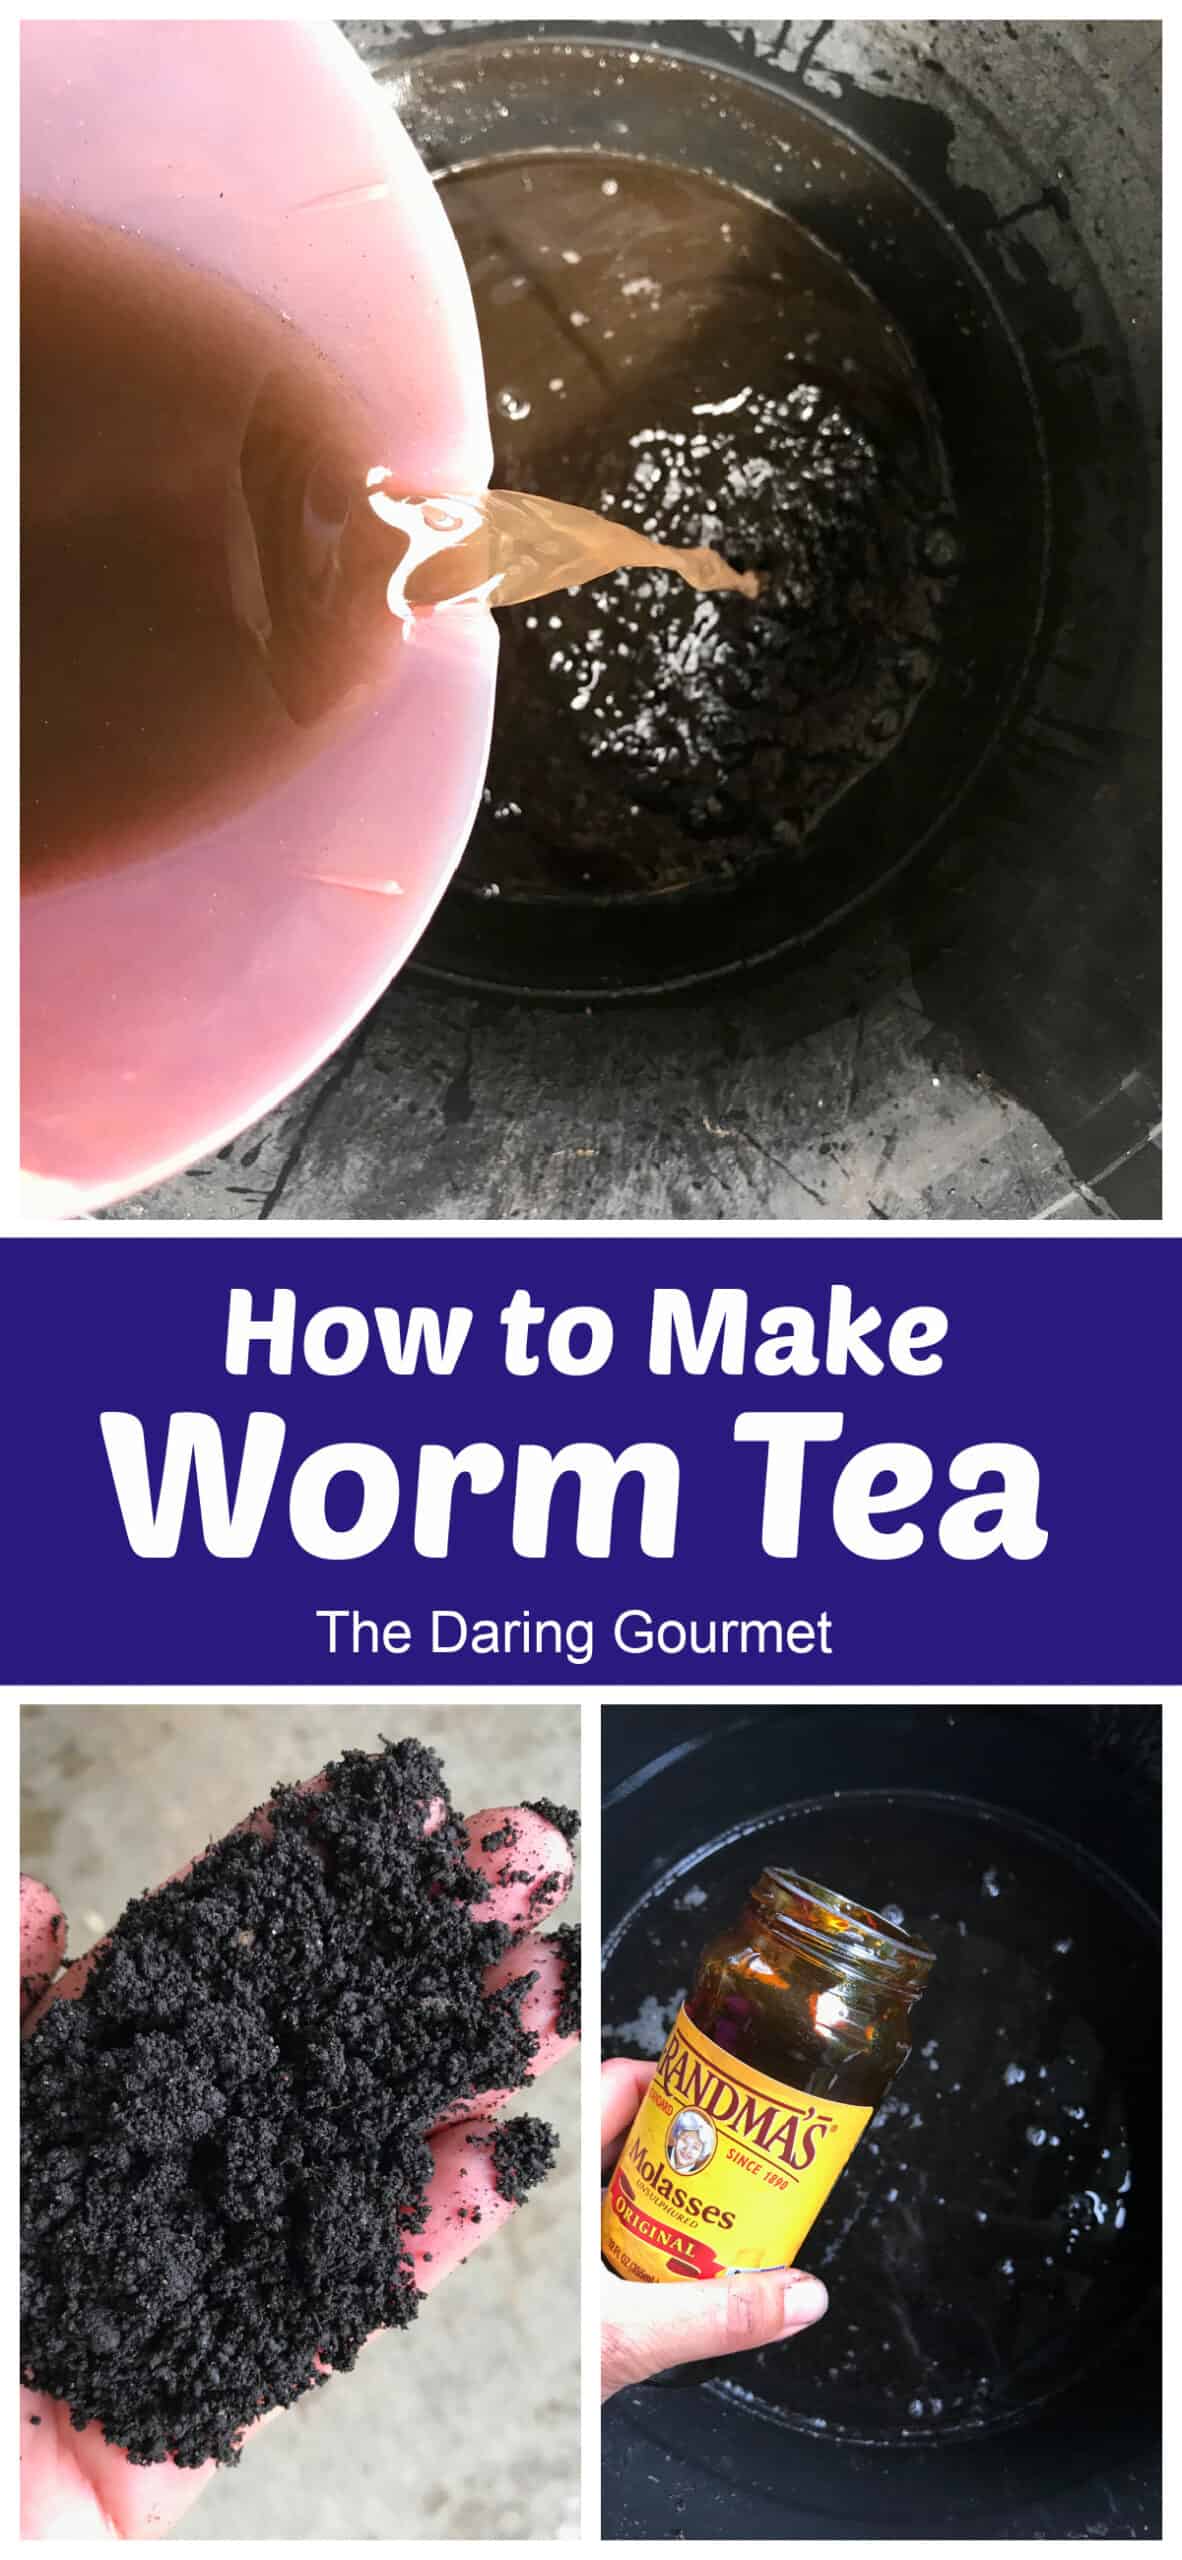 worm tea how to make vermicompost castings recipe gardening vegetables compost